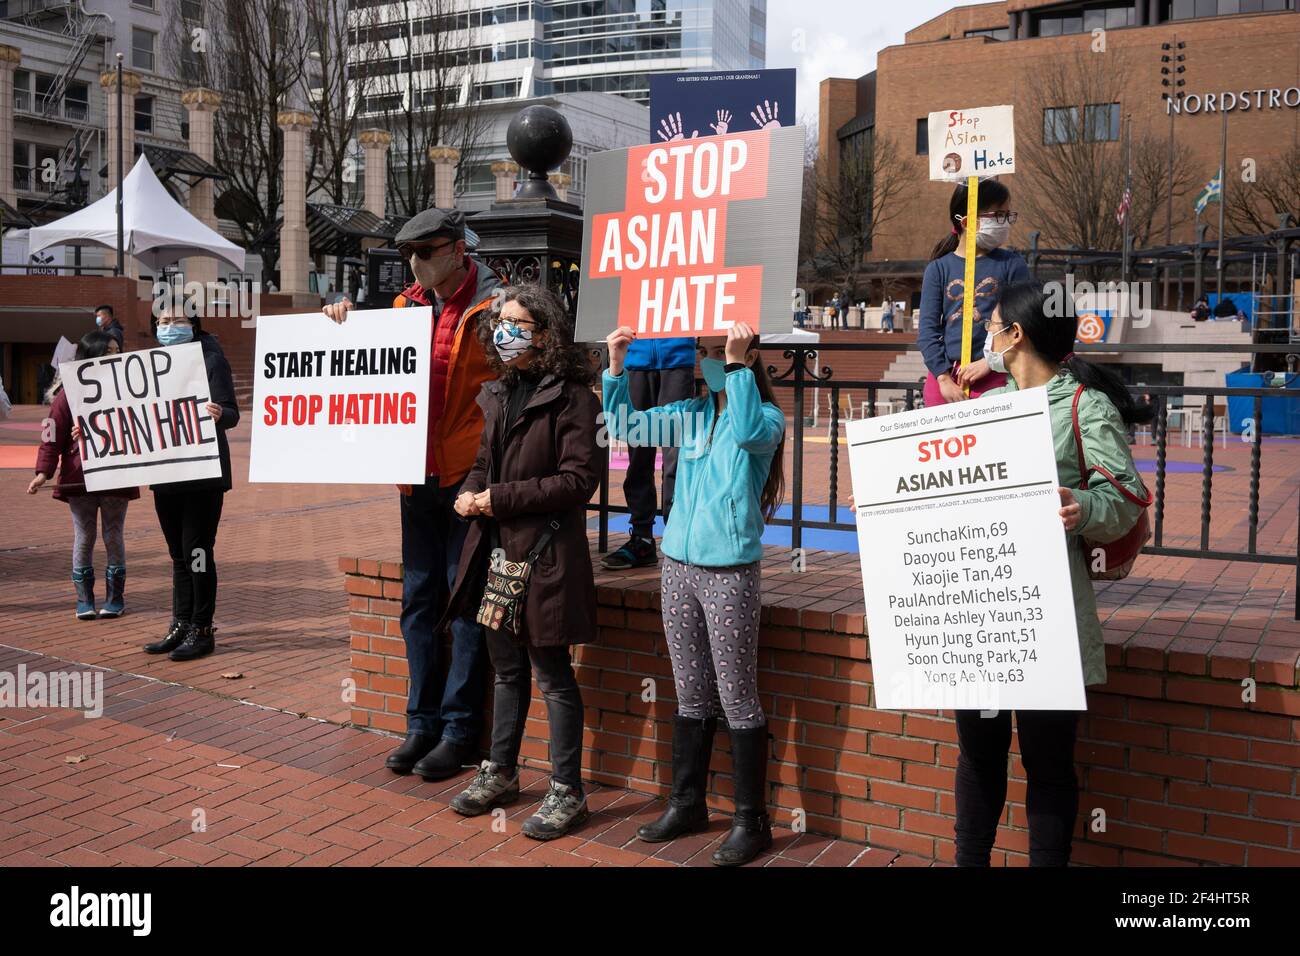 Peaceful demonstrators are seen in downtown Portland's Pioneer Courthouse Square denouncing violence against Asian Americans on Sunday, March 21, 2021. Stock Photo